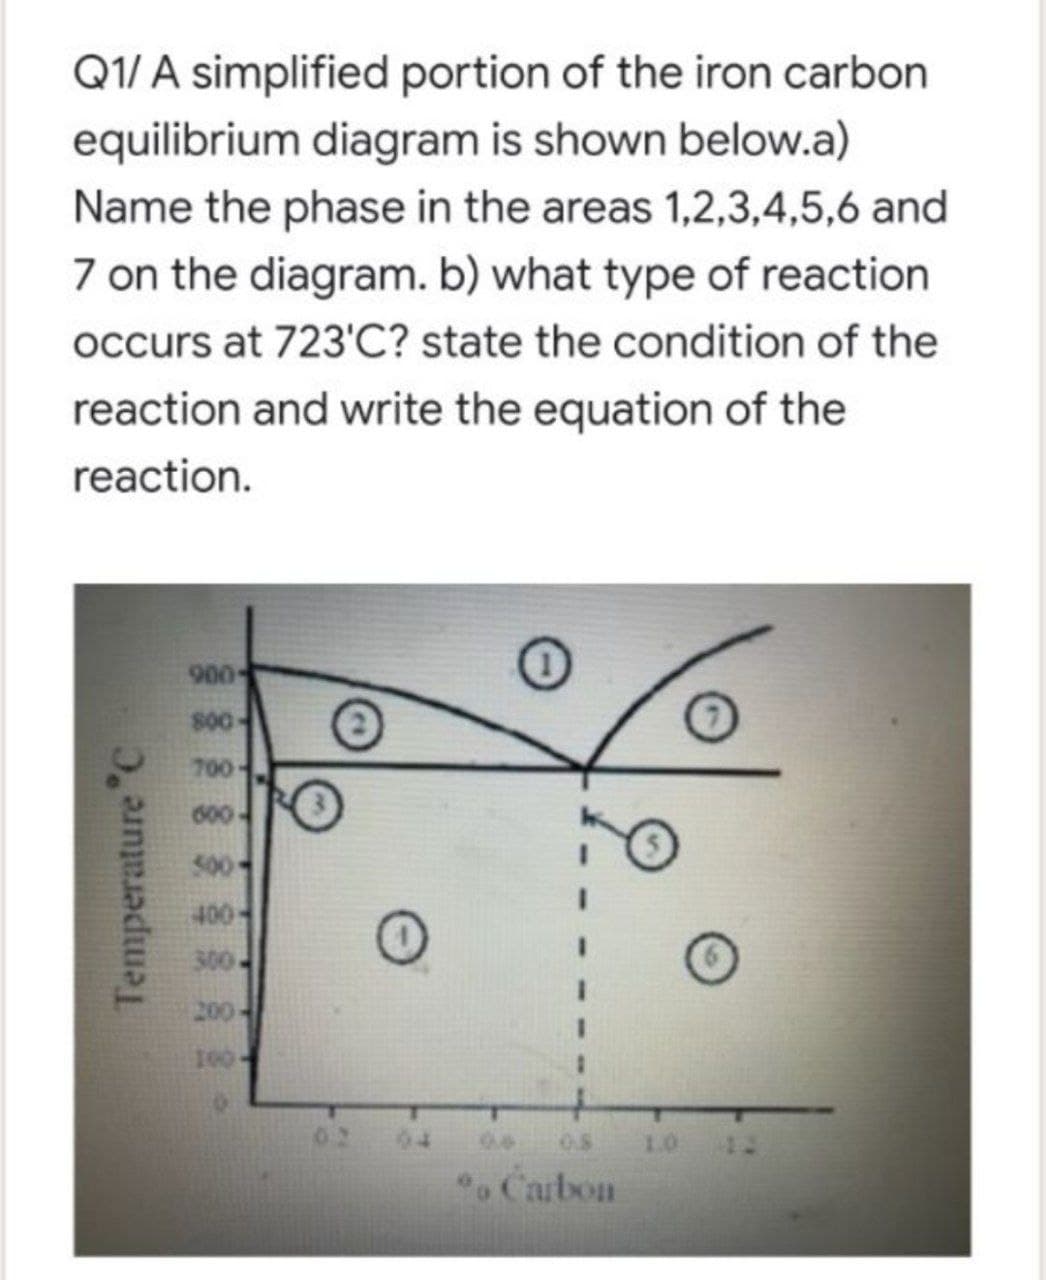 Q1/ A simplified portion of the iron carbon
equilibrium diagram is shown below.a)
Name the phase in the areas 1,2,3,4,5,6 and
7 on the diagram. b) what type of reaction
occurs at 723'C? state the condition of the
reaction and write the equation of the
reaction.
900
800
700->
600->
500
400
300
200-
100->
0.8
1.0
.Carbon
Temperature "C
